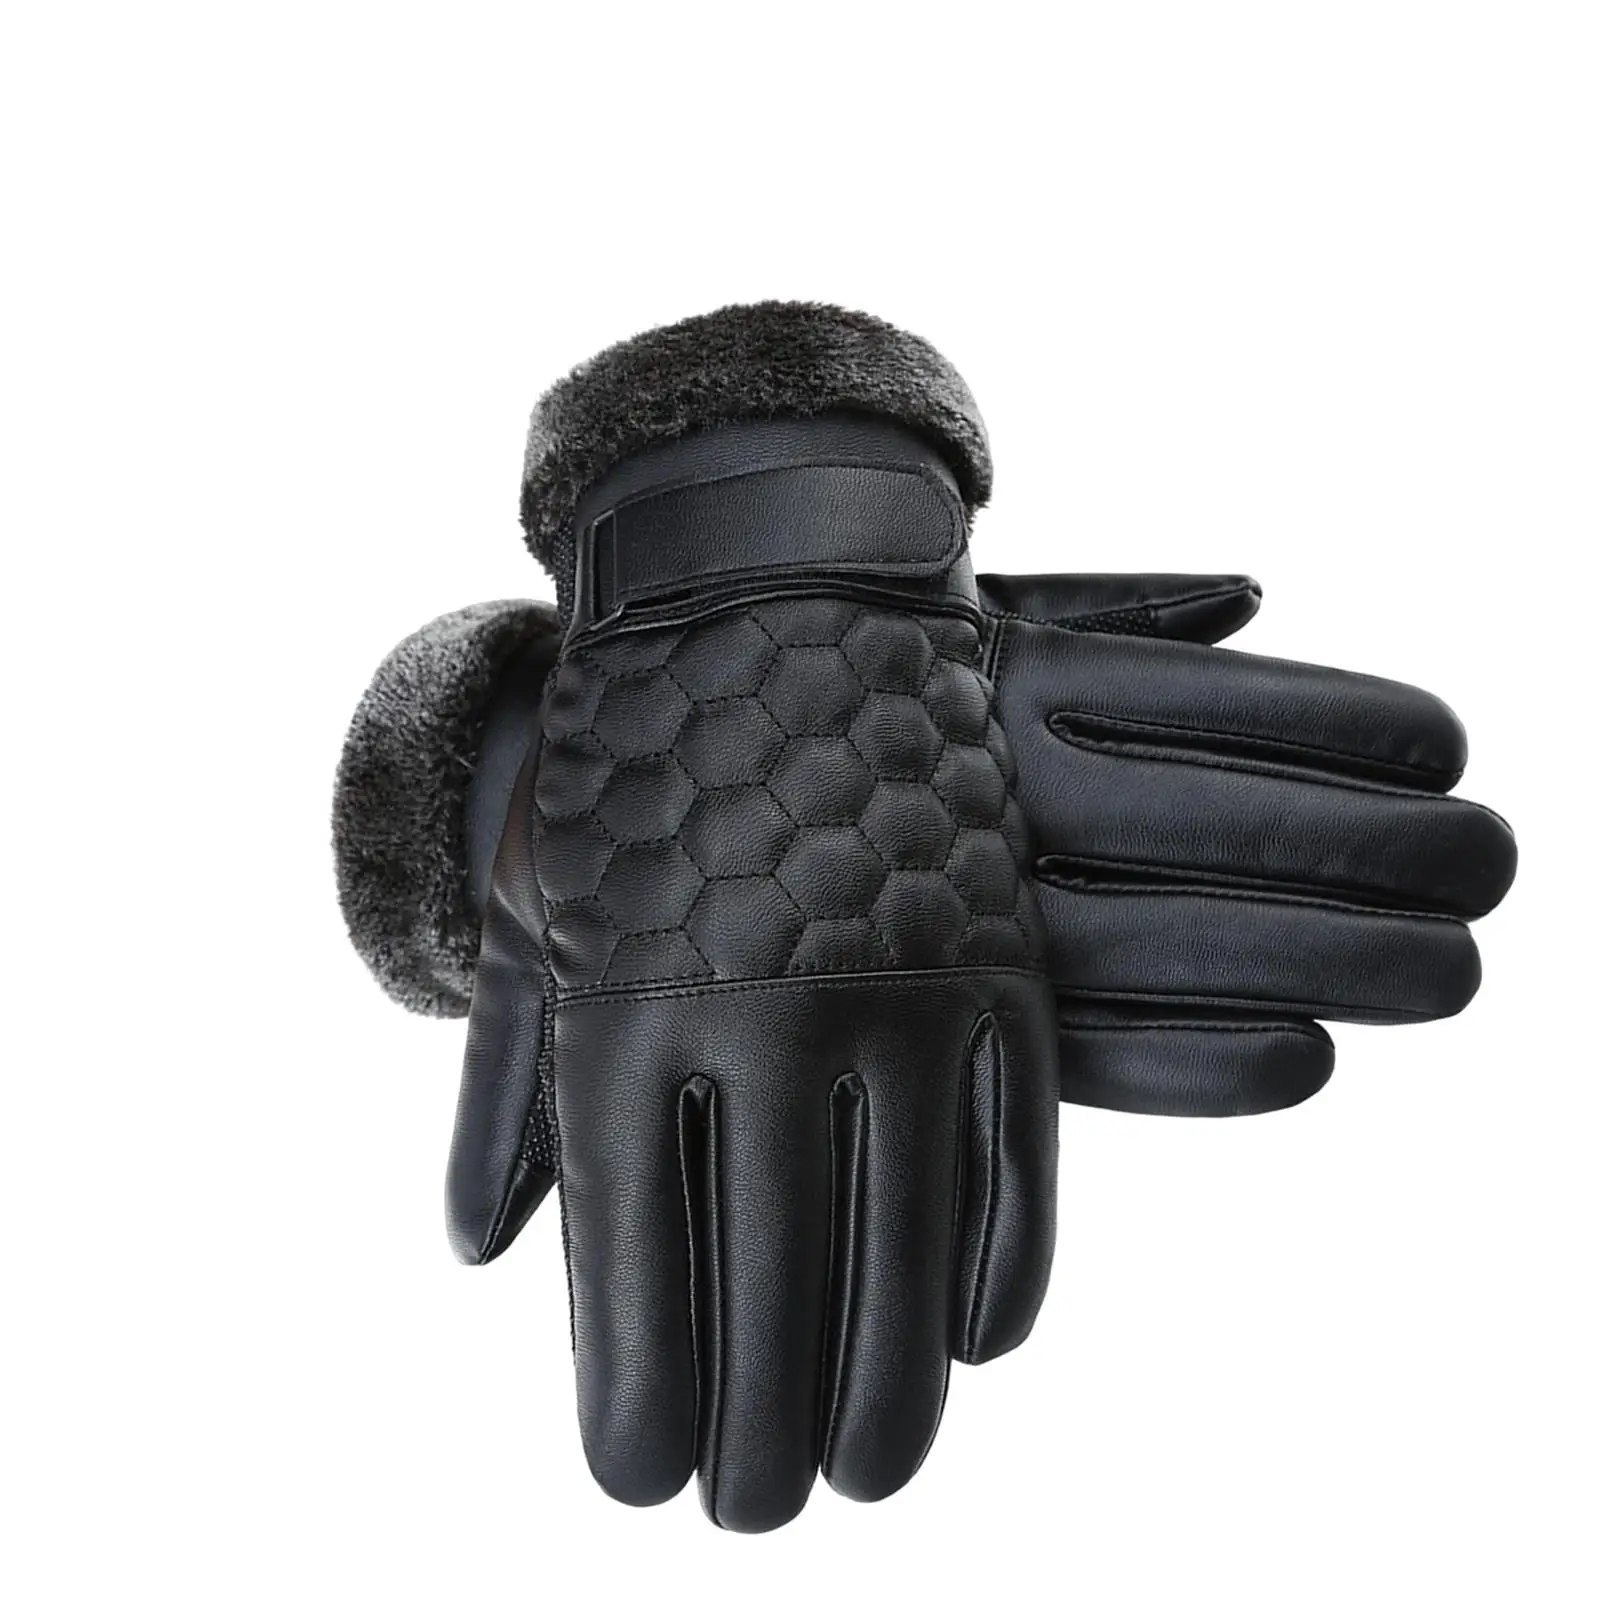 Winter Gloves Durable Touch Screen Weather Resistant Comfortable Thermal Gloves for Outdoor Skiing Skateboarding Texting Cycling